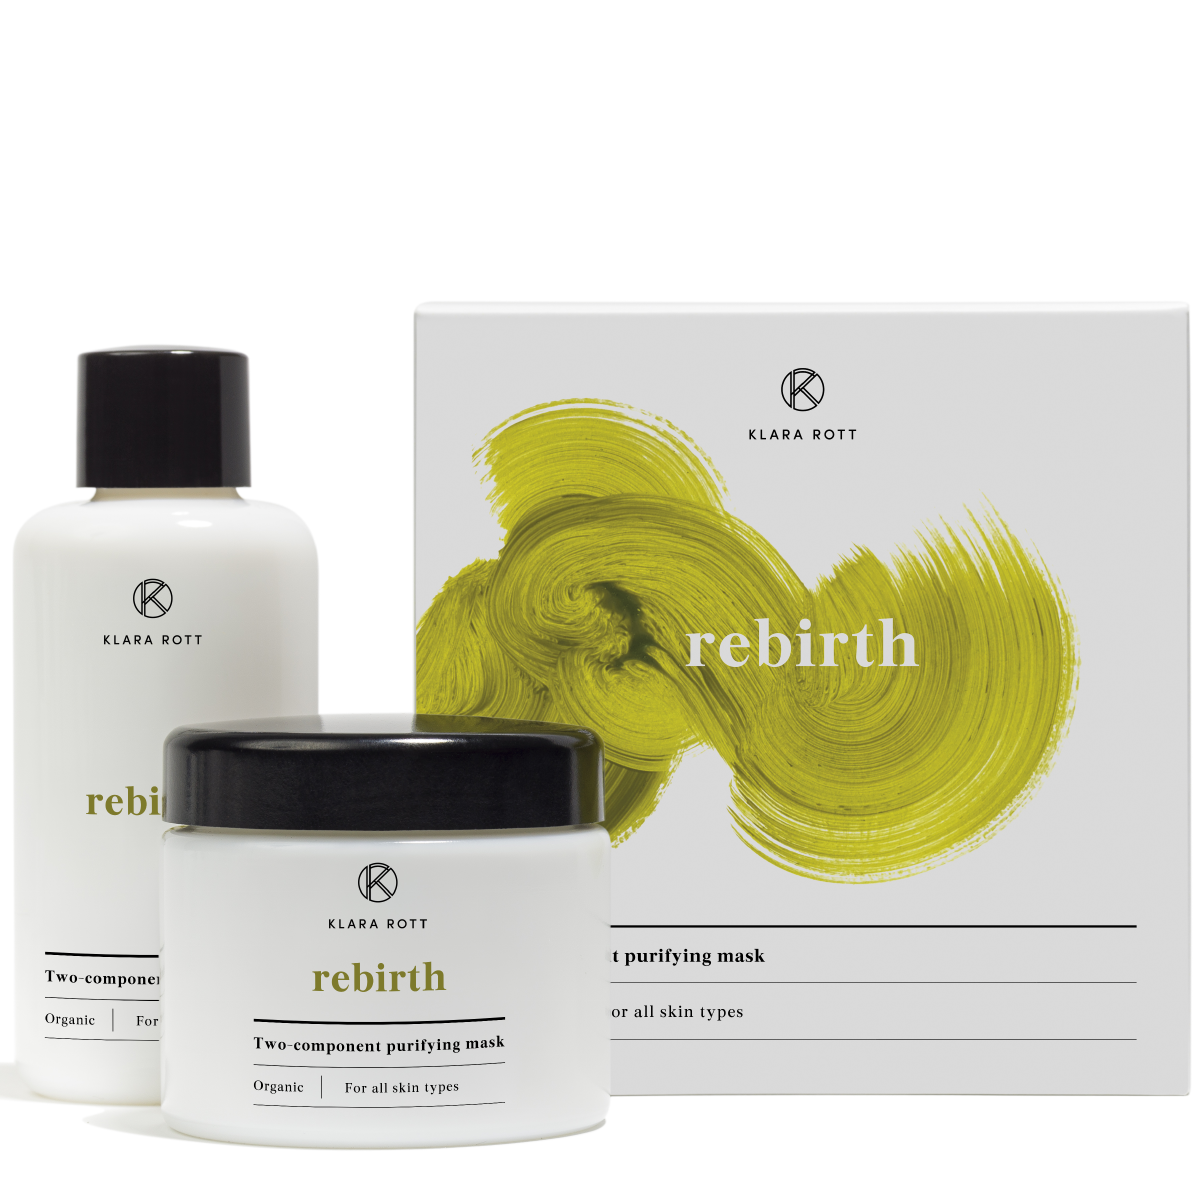 Rebirth - Two-component cleansing mask 